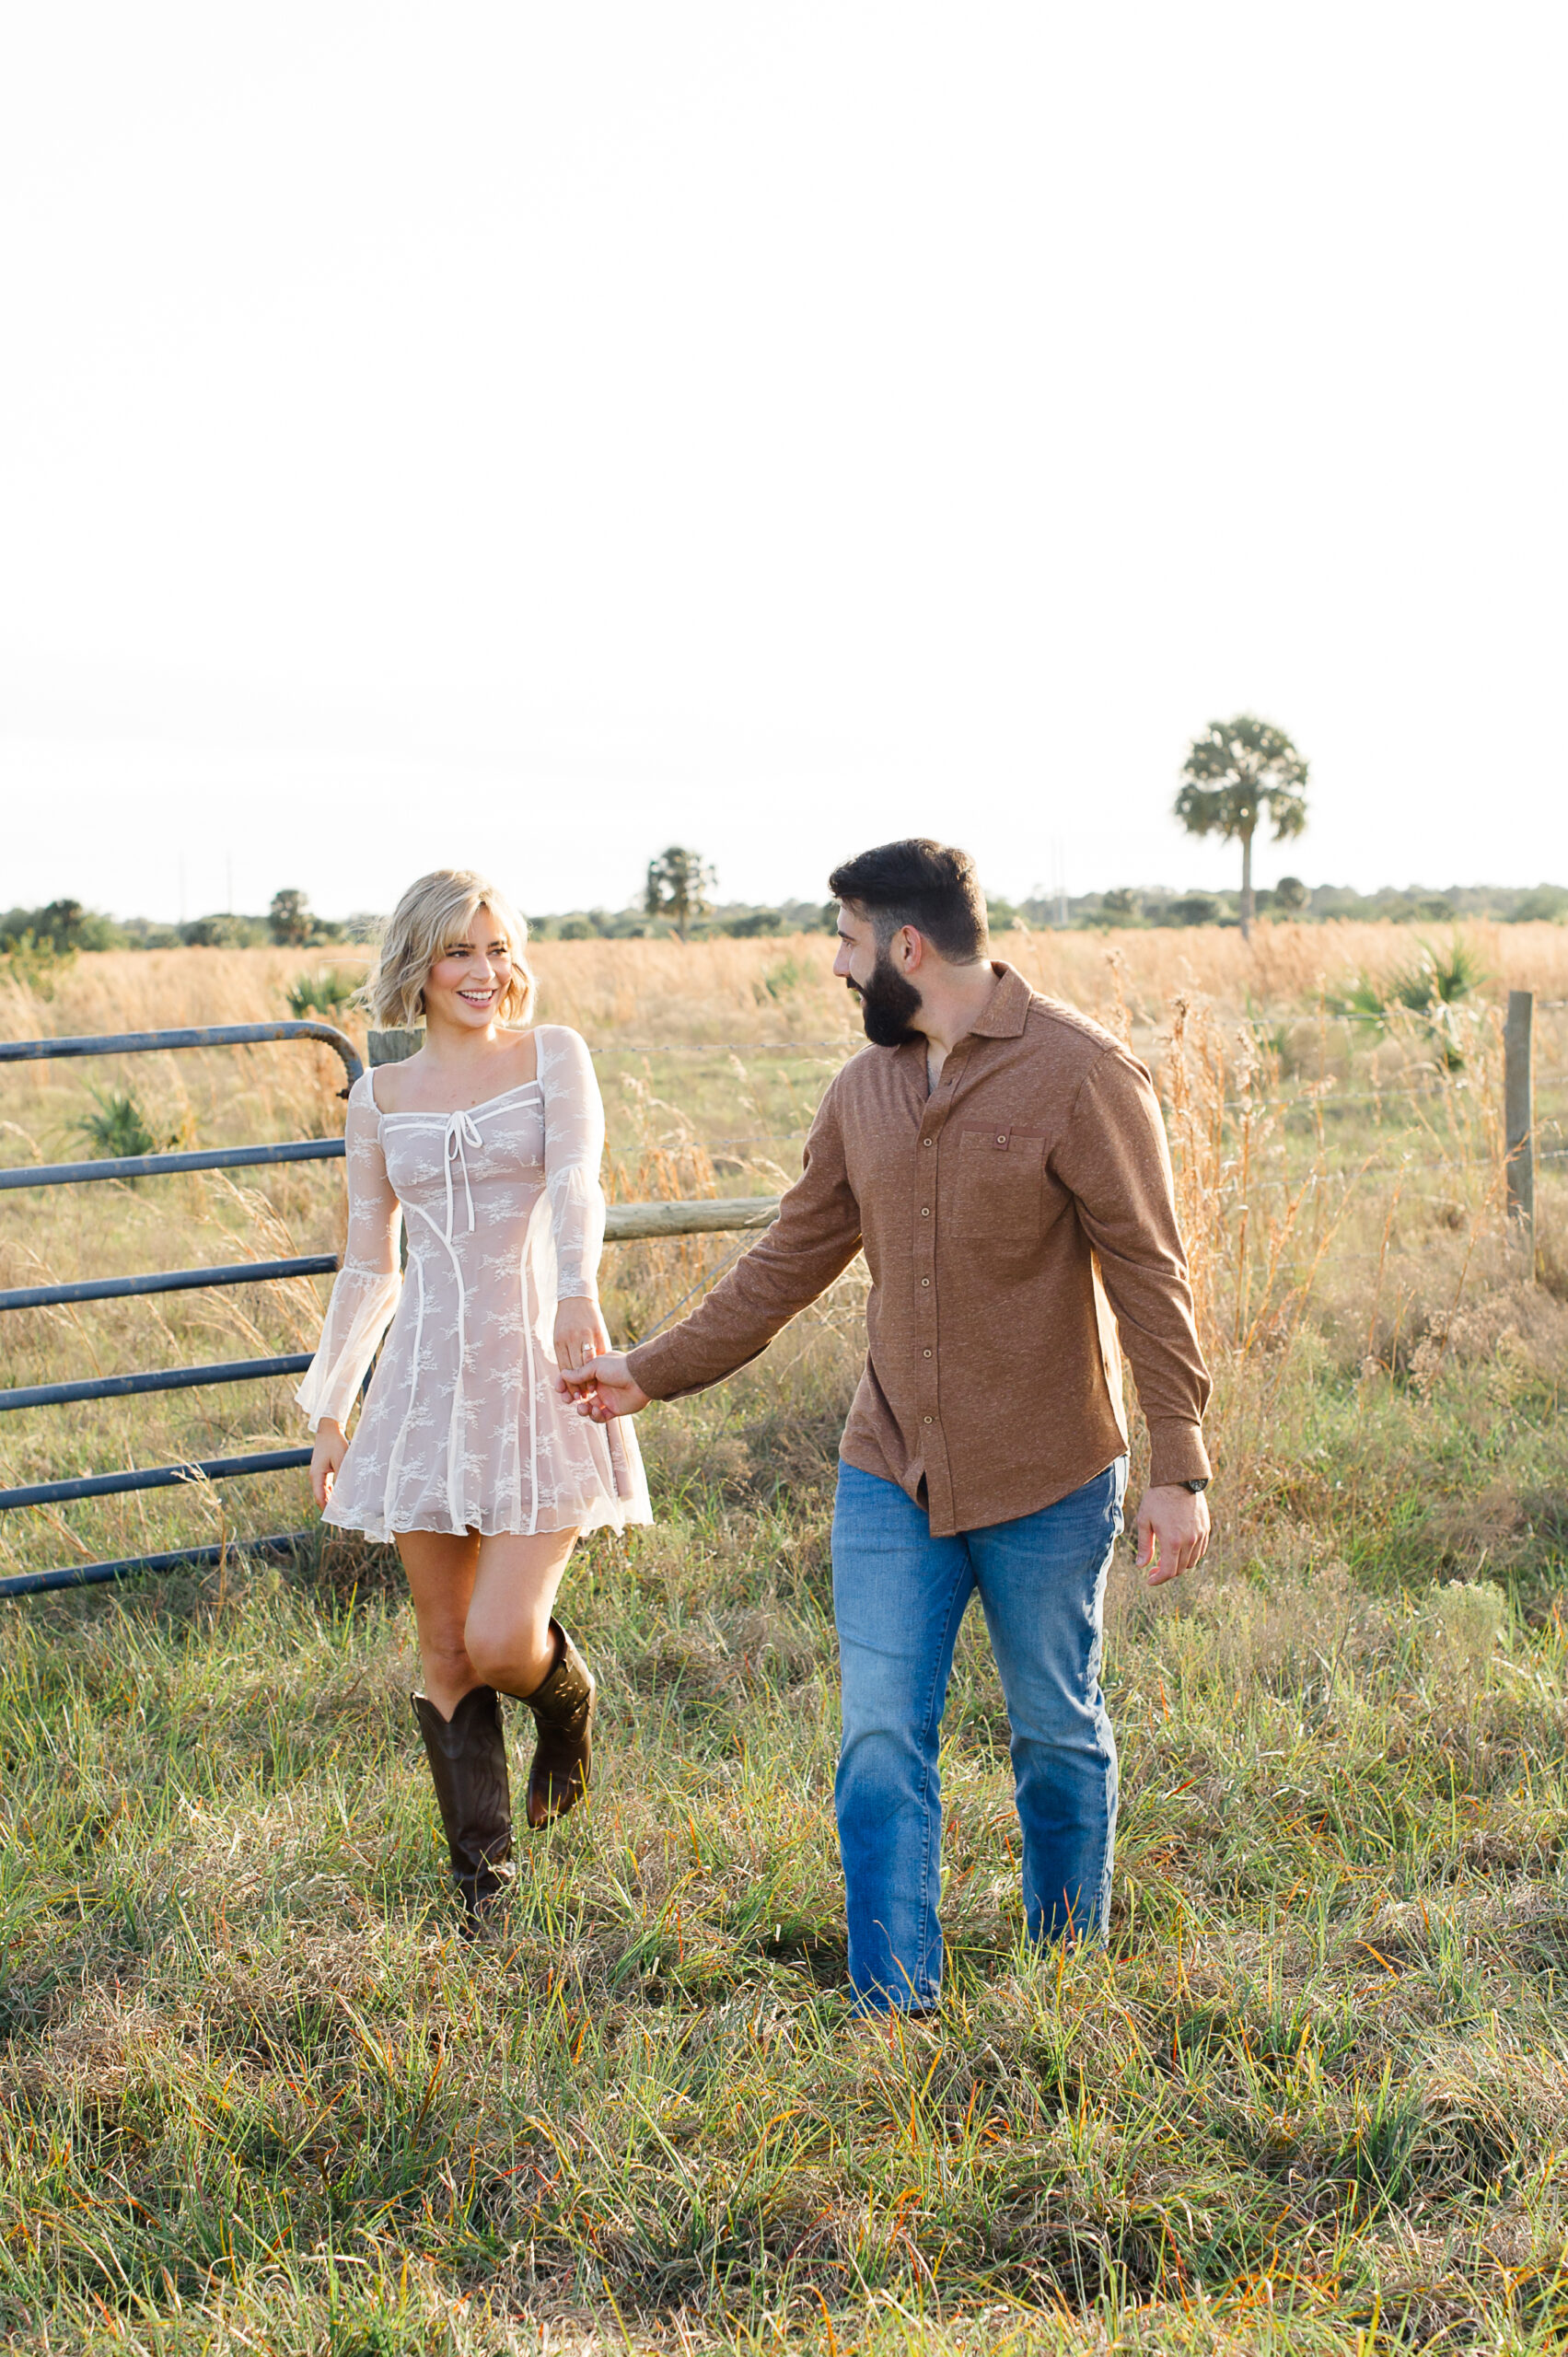 Stunning engaged couple walking through a field of tall grass!